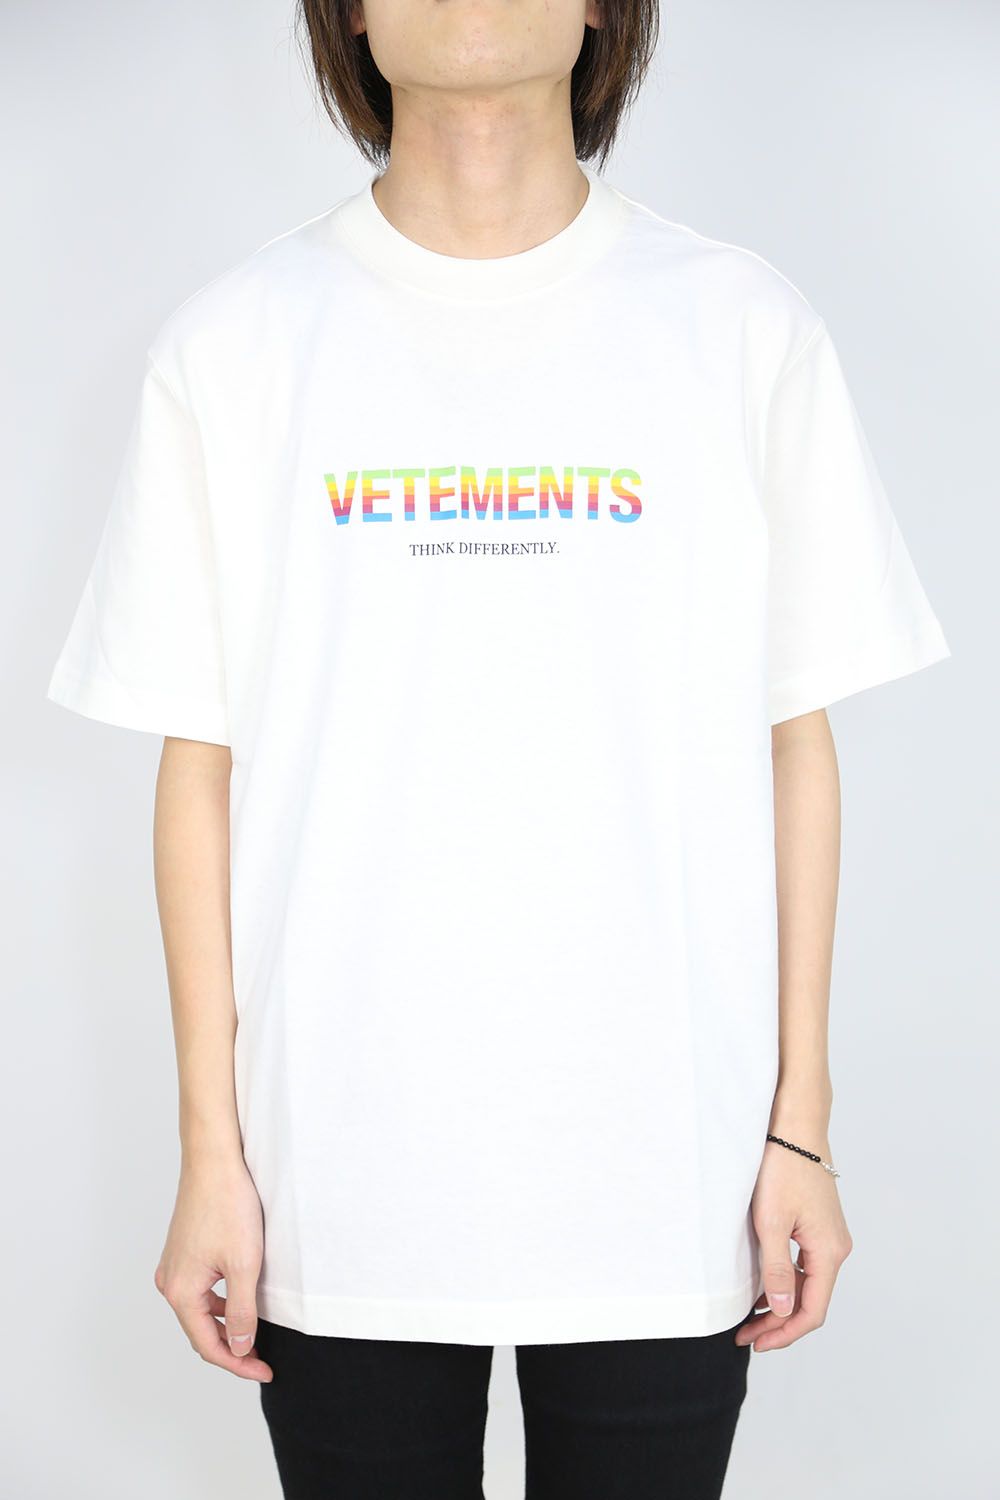 VETEMENTS - THINK DIFFERENTLY LOGO T-SHIRT / ホワイト | Tempt